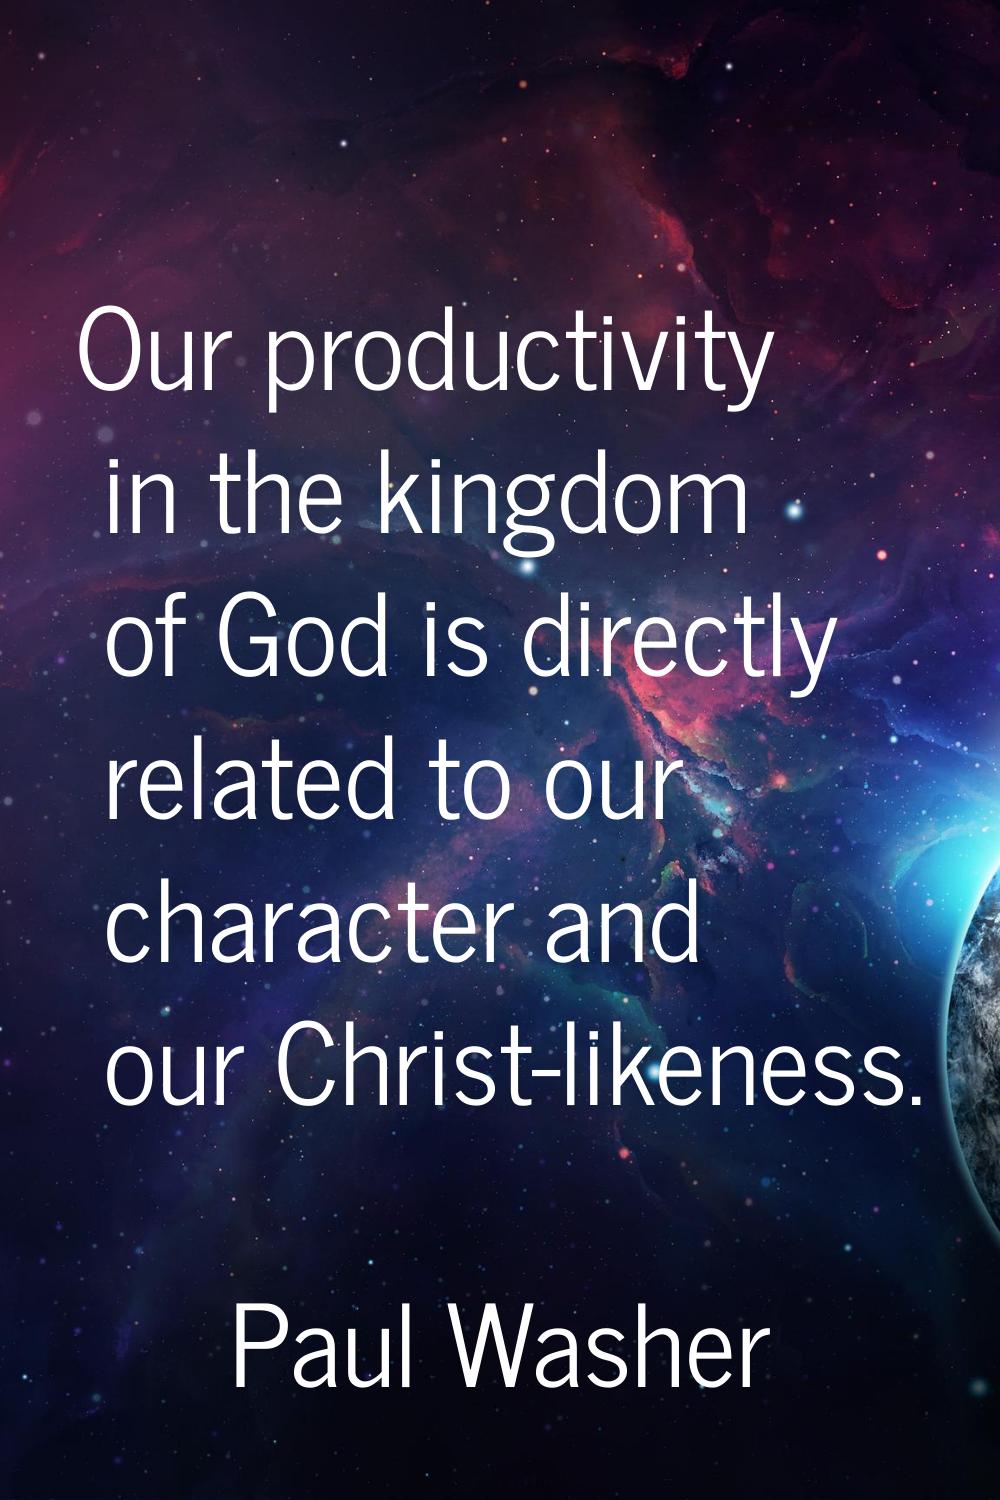 Our productivity in the kingdom of God is directly related to our character and our Christ-likeness